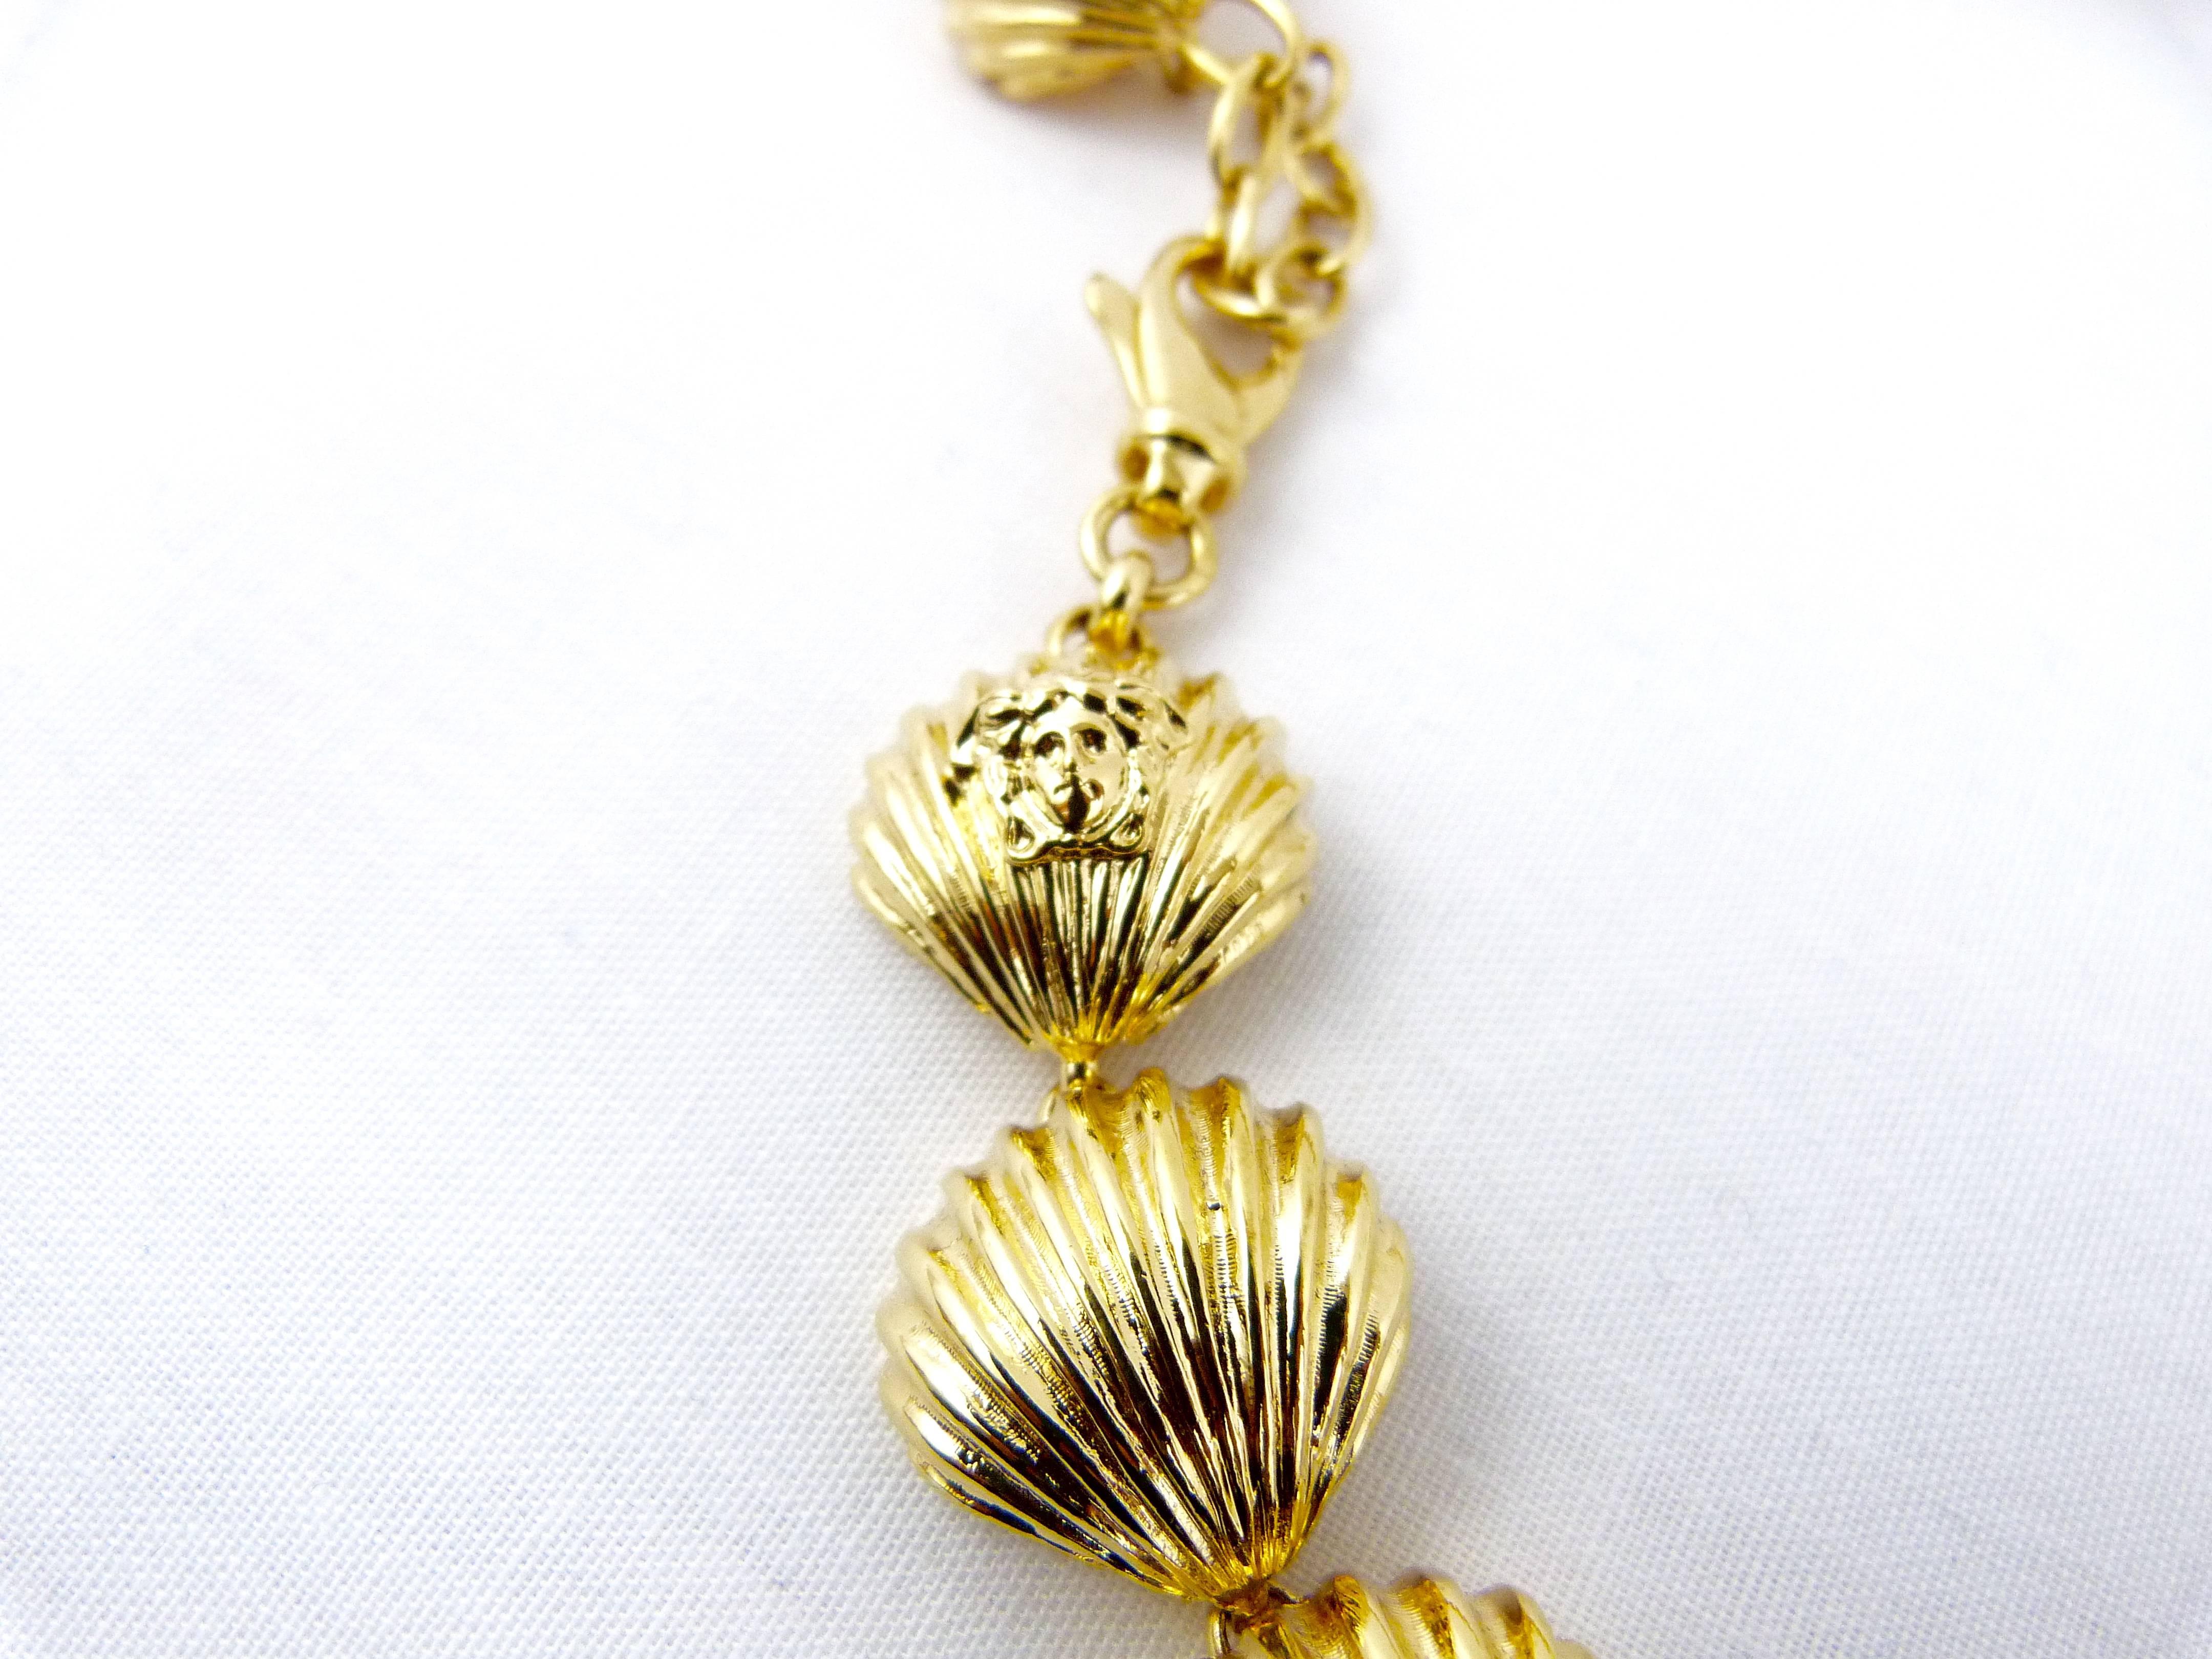 Gianni Versace 1990's gold tone shell necklace In Excellent Condition For Sale In Nottingham, GB